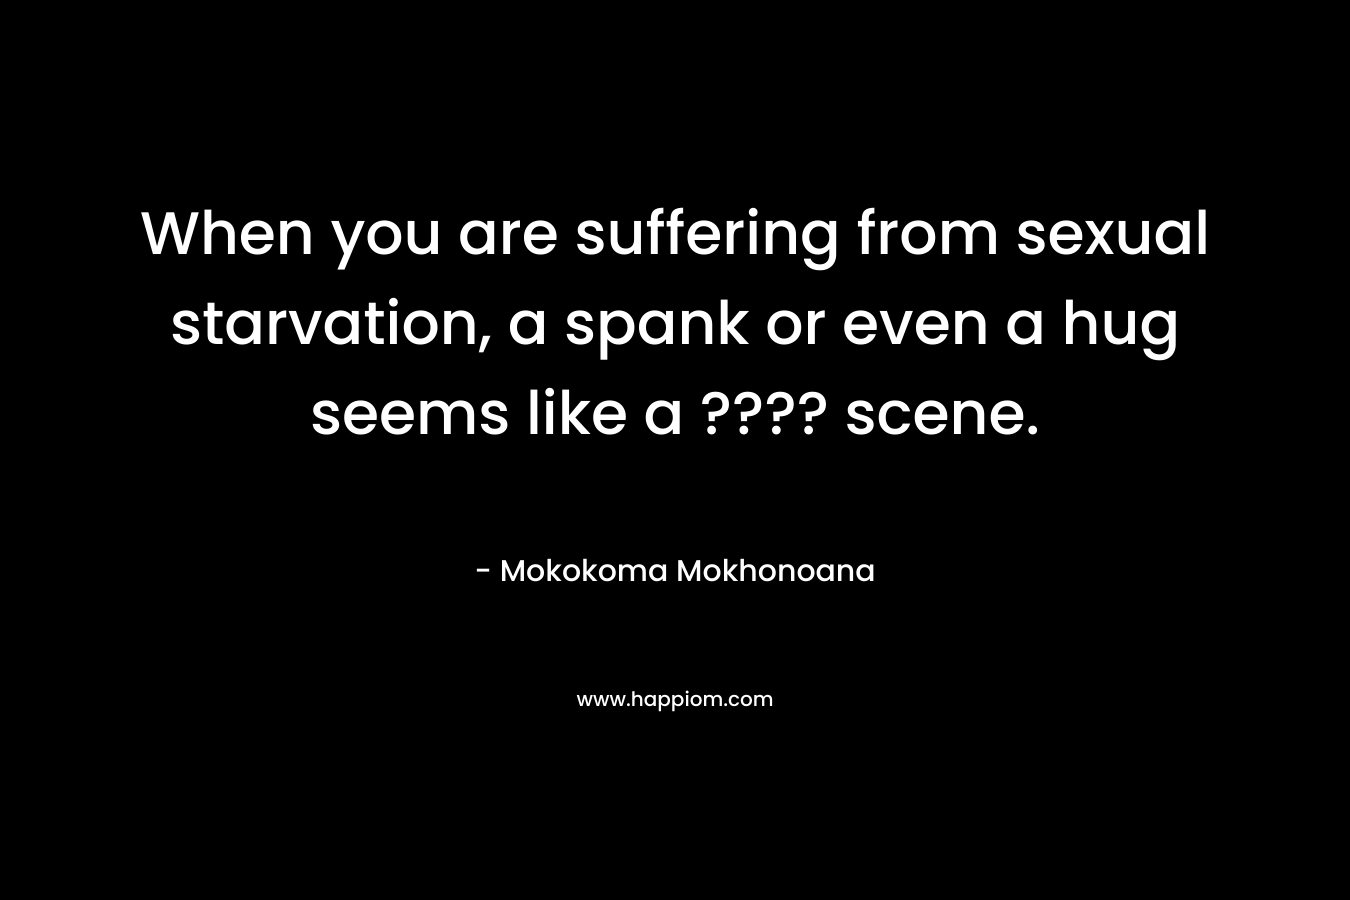 When you are suffering from sexual starvation, a spank or even a hug seems like a ???? scene.